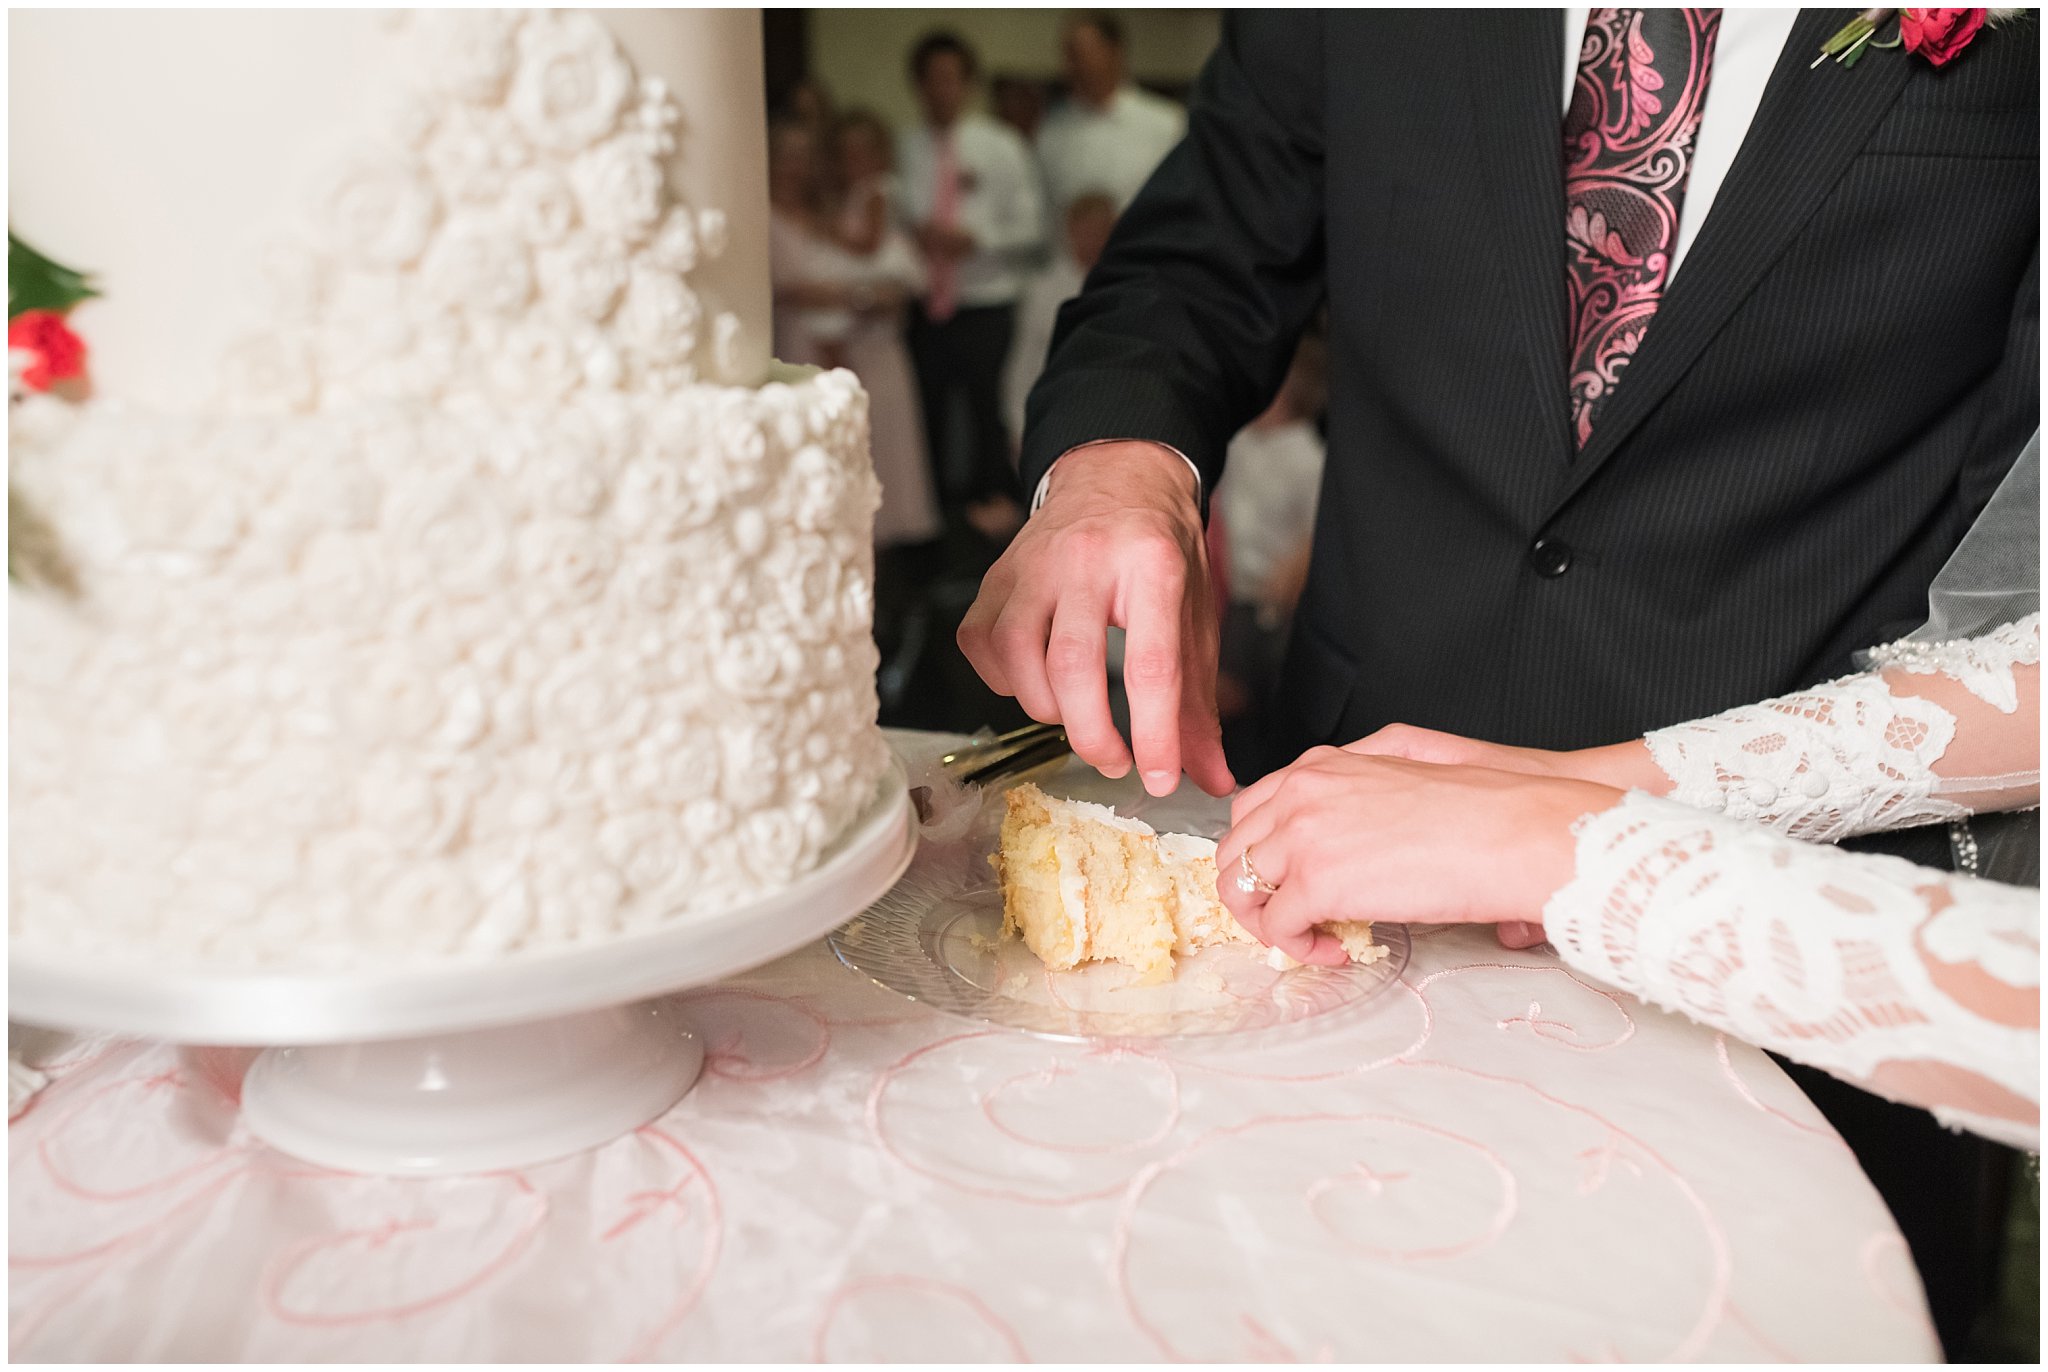 Caking cutting and smashing during reception in the barn | Wadley Farms Summer Wedding | Jessie and Dallin Photography